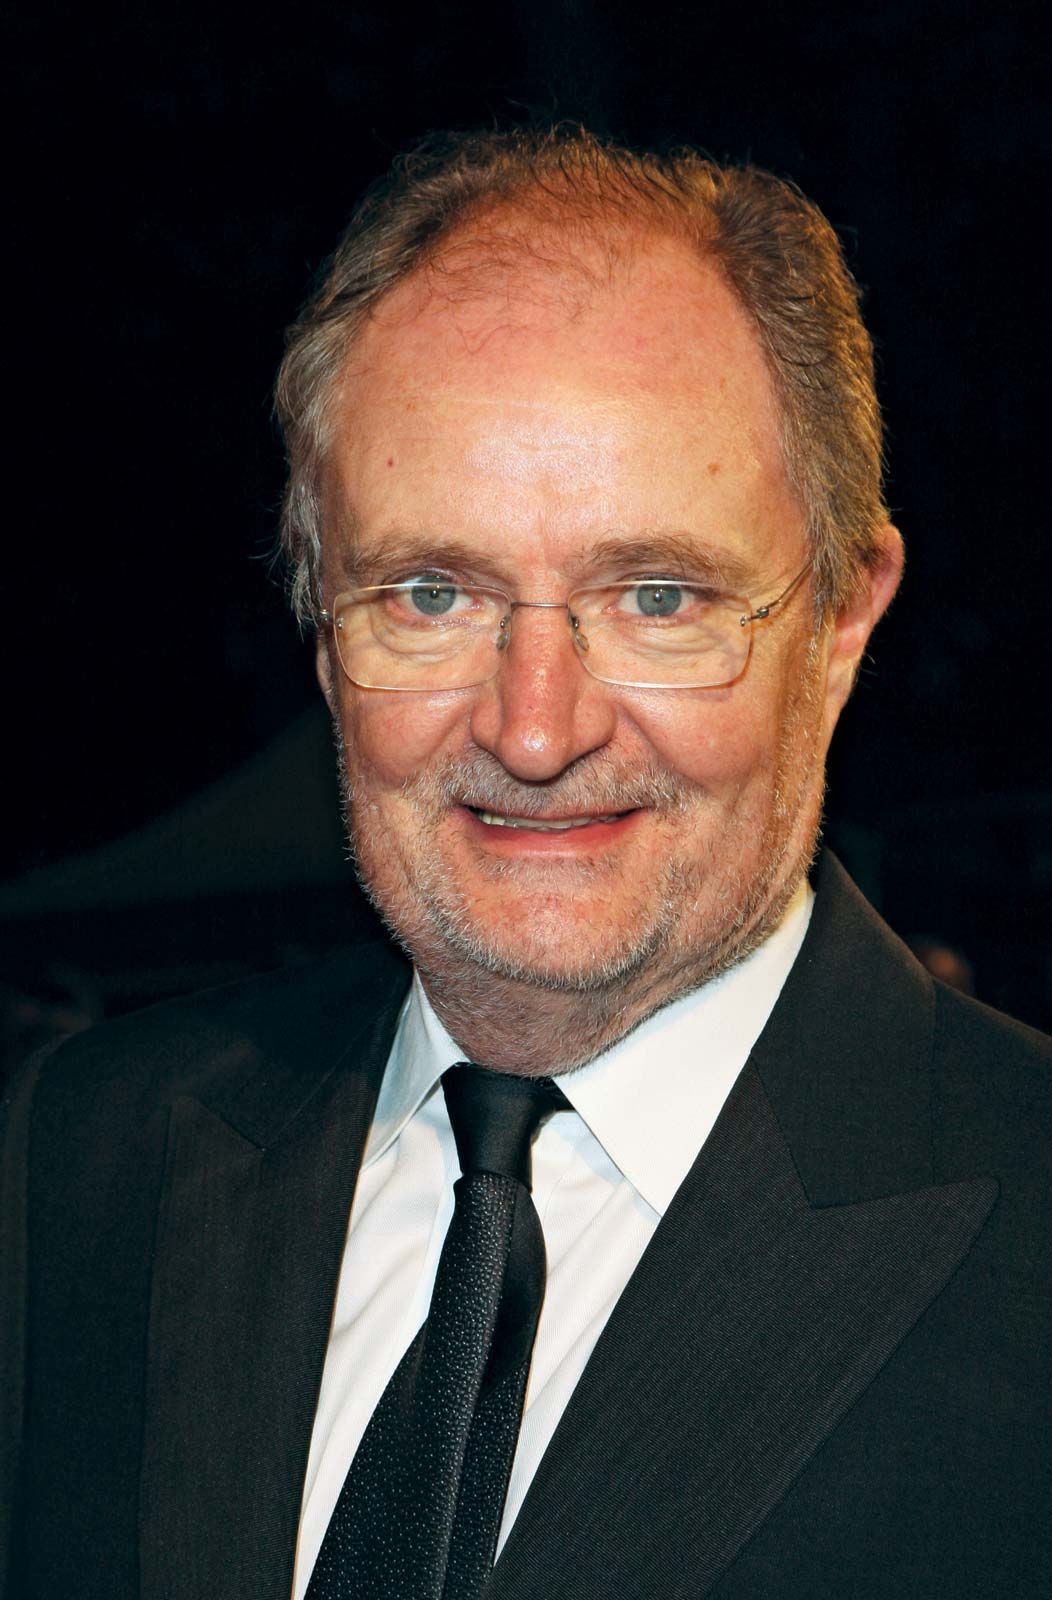 What is the name of the actor who portrayed Horace Slughorn?